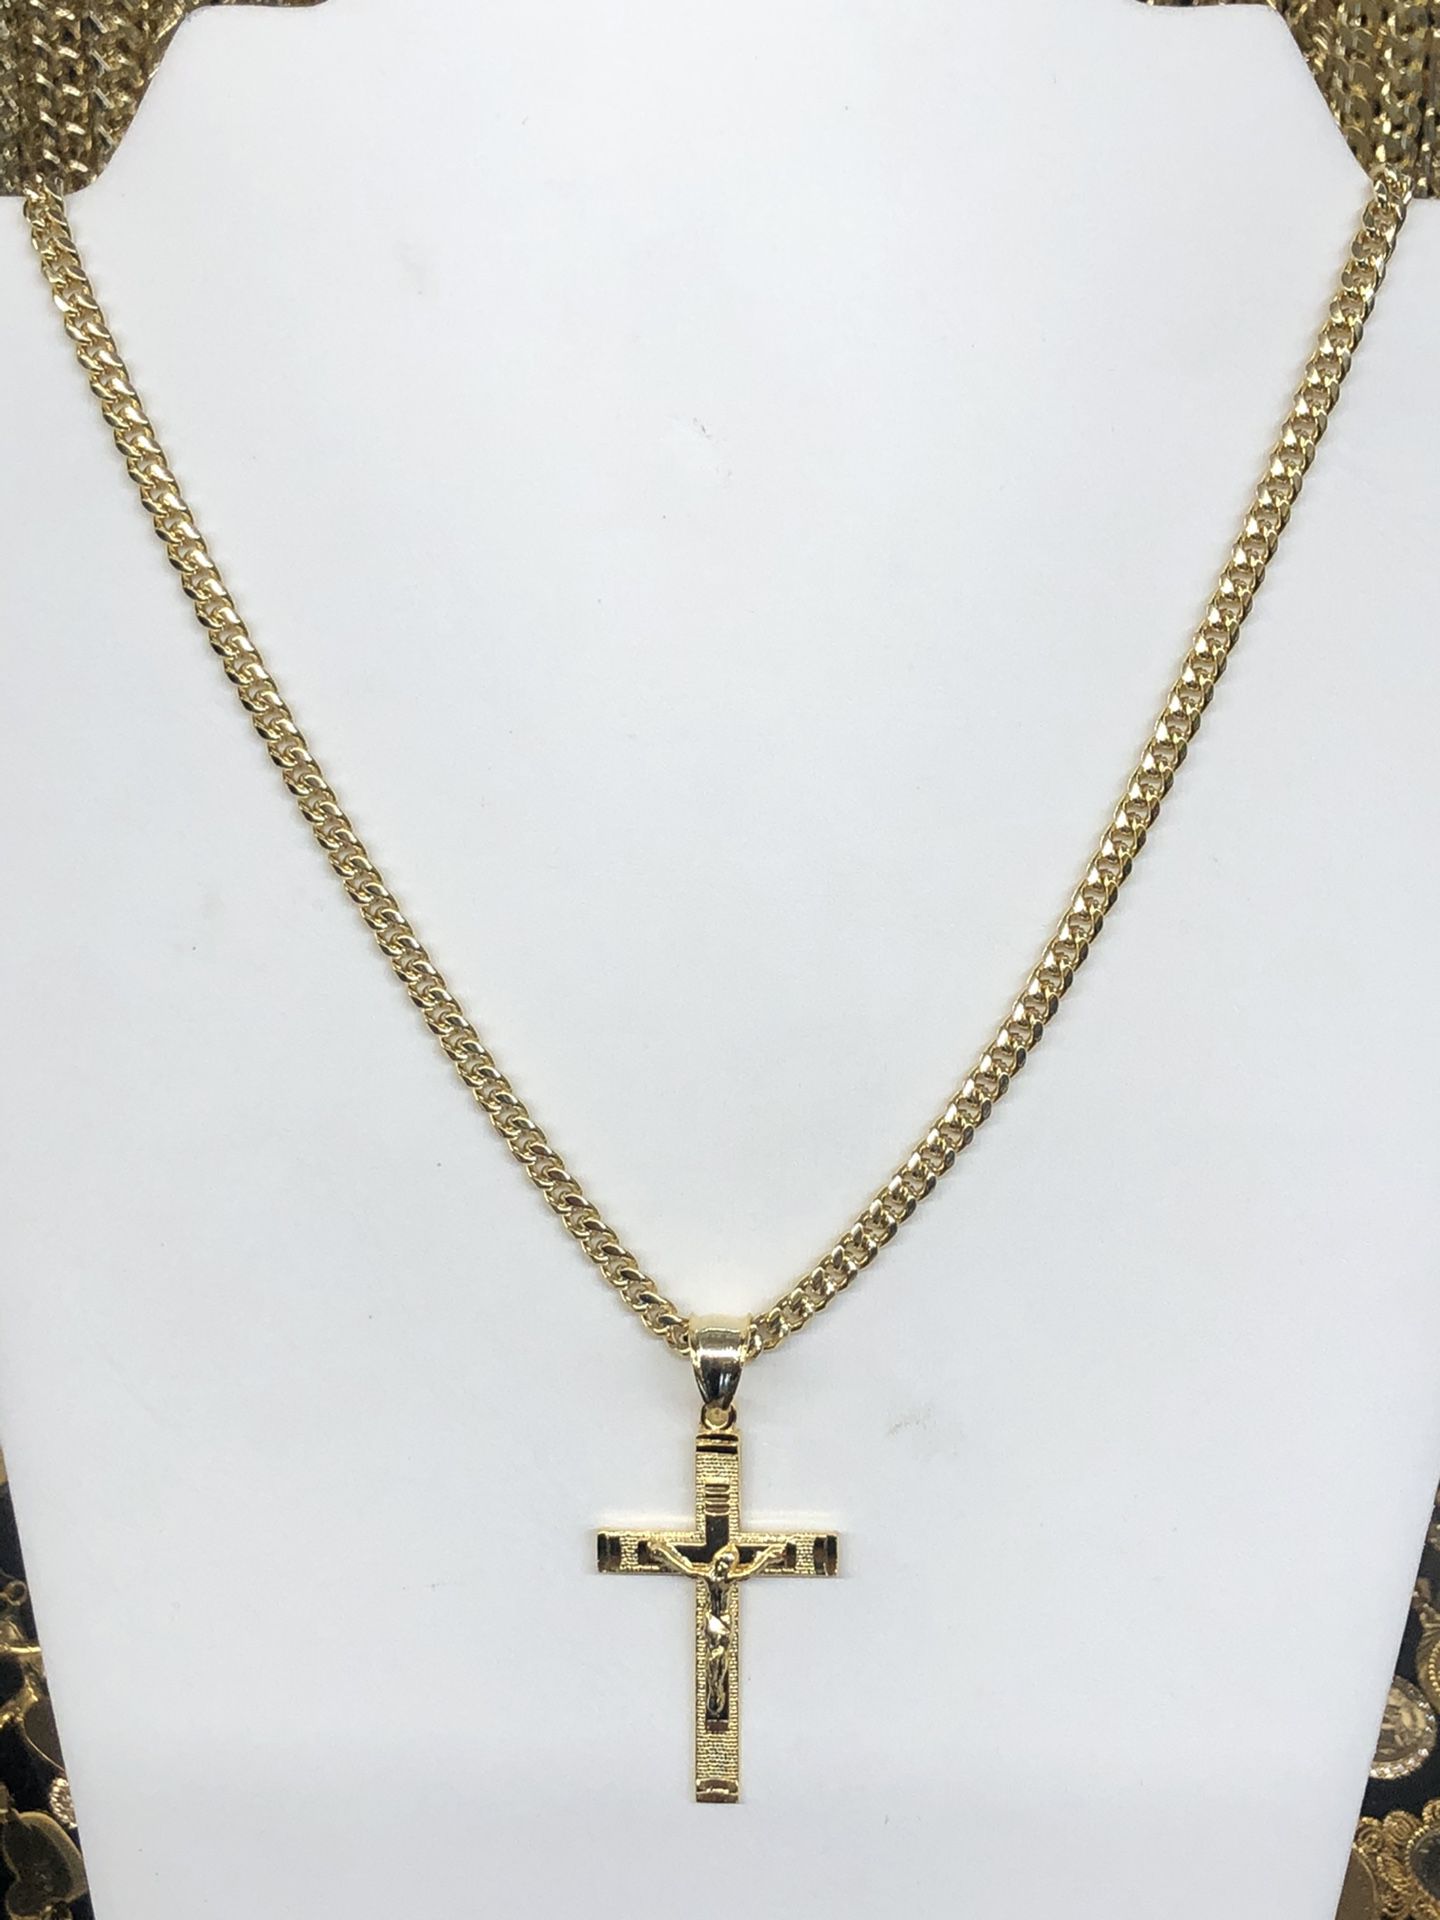 Beautiful 14k gold bonded Jesus pendant and 24”Cuban link necklace available in different lengths best quality guarantee ✅✅✅ Free shipping fast deli